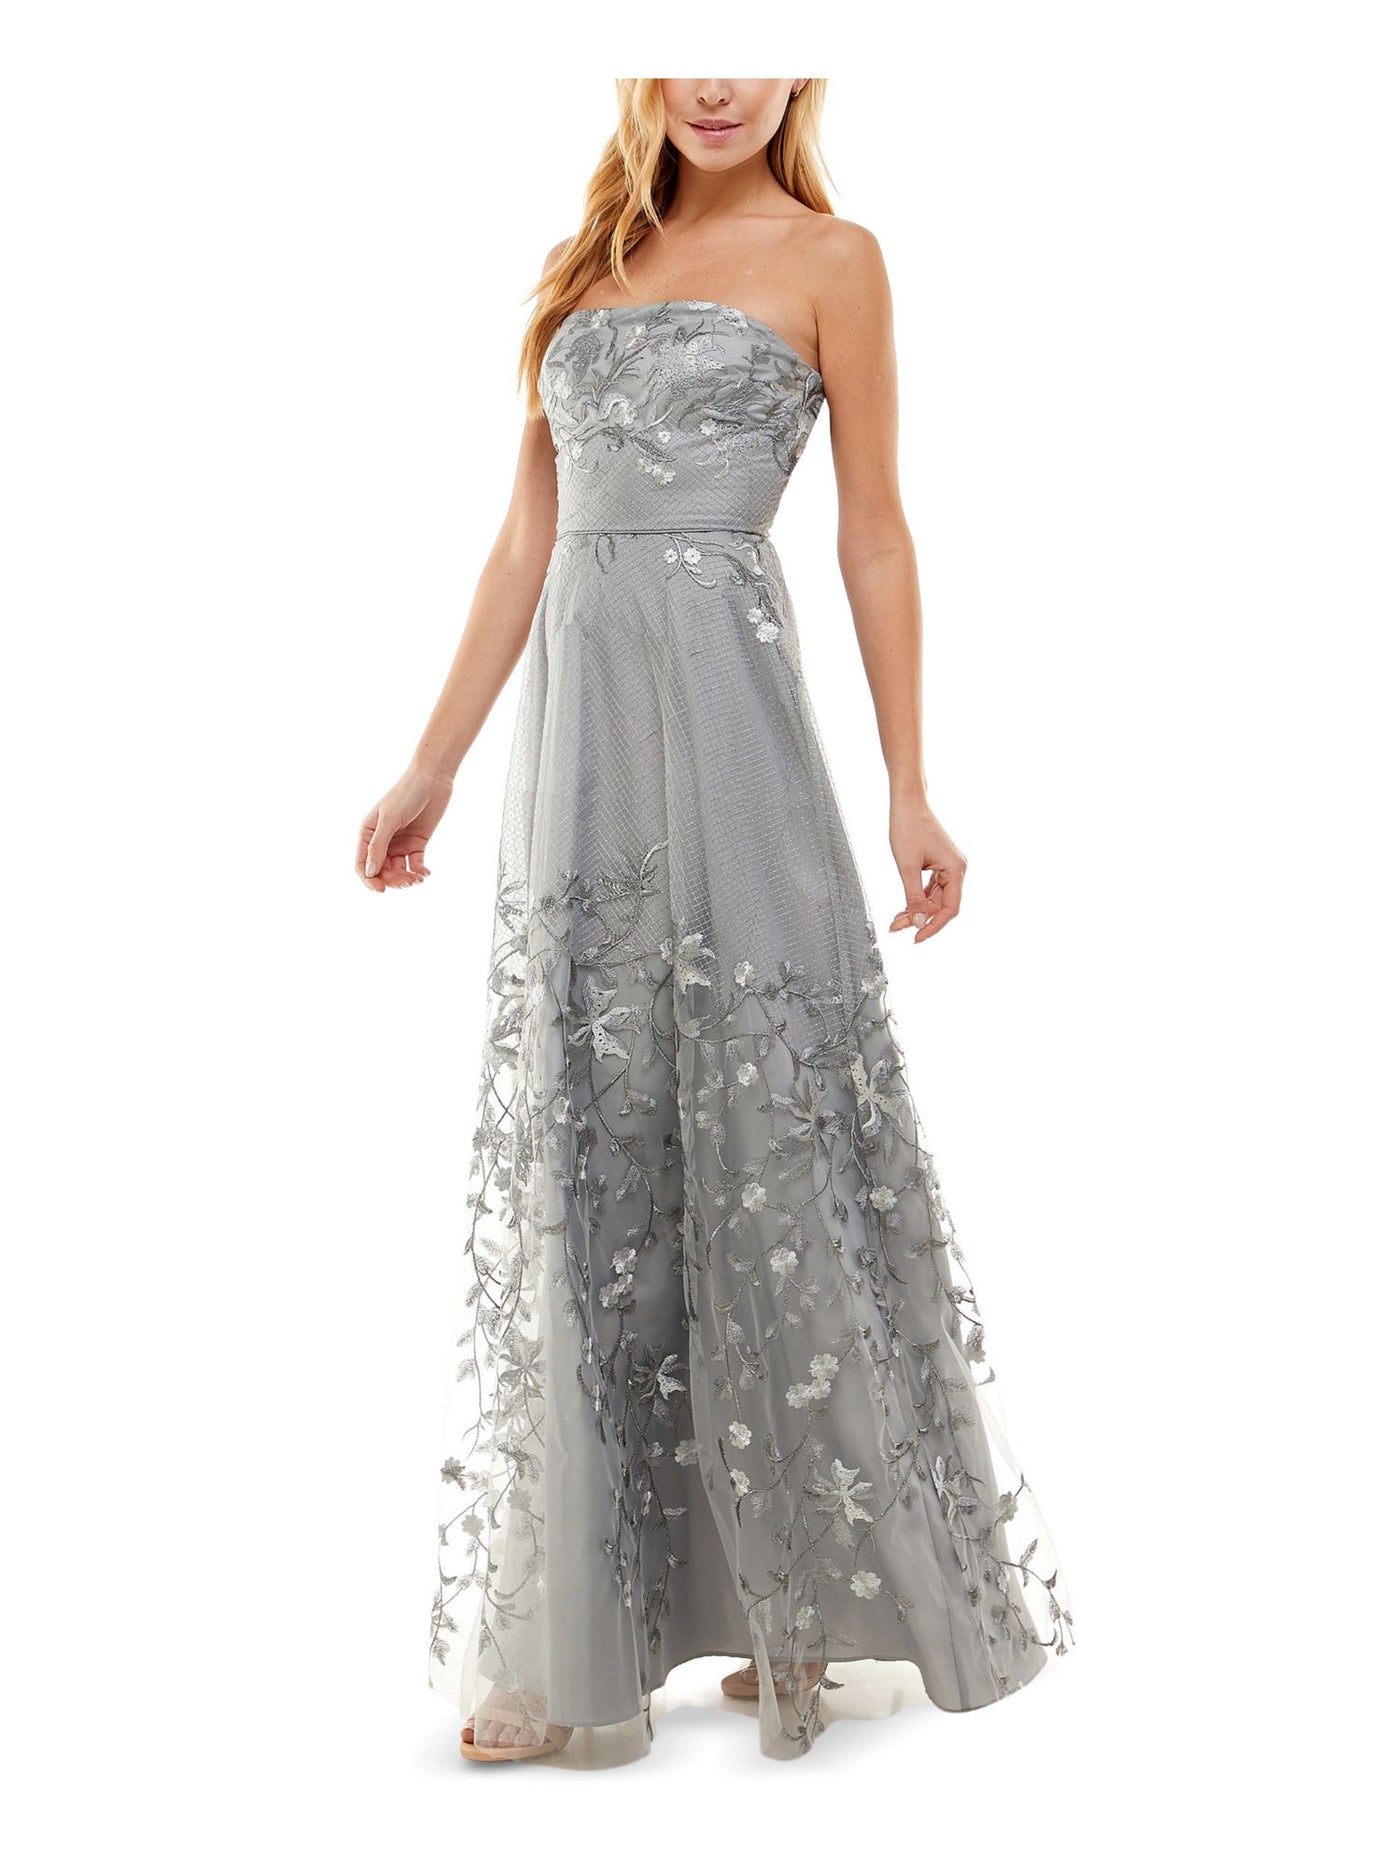 CITY STUDIO Womens Gray Embroidered Lace Zippered Sleeveless Strapless Full-Length  Gown Prom Dress Juniors 7